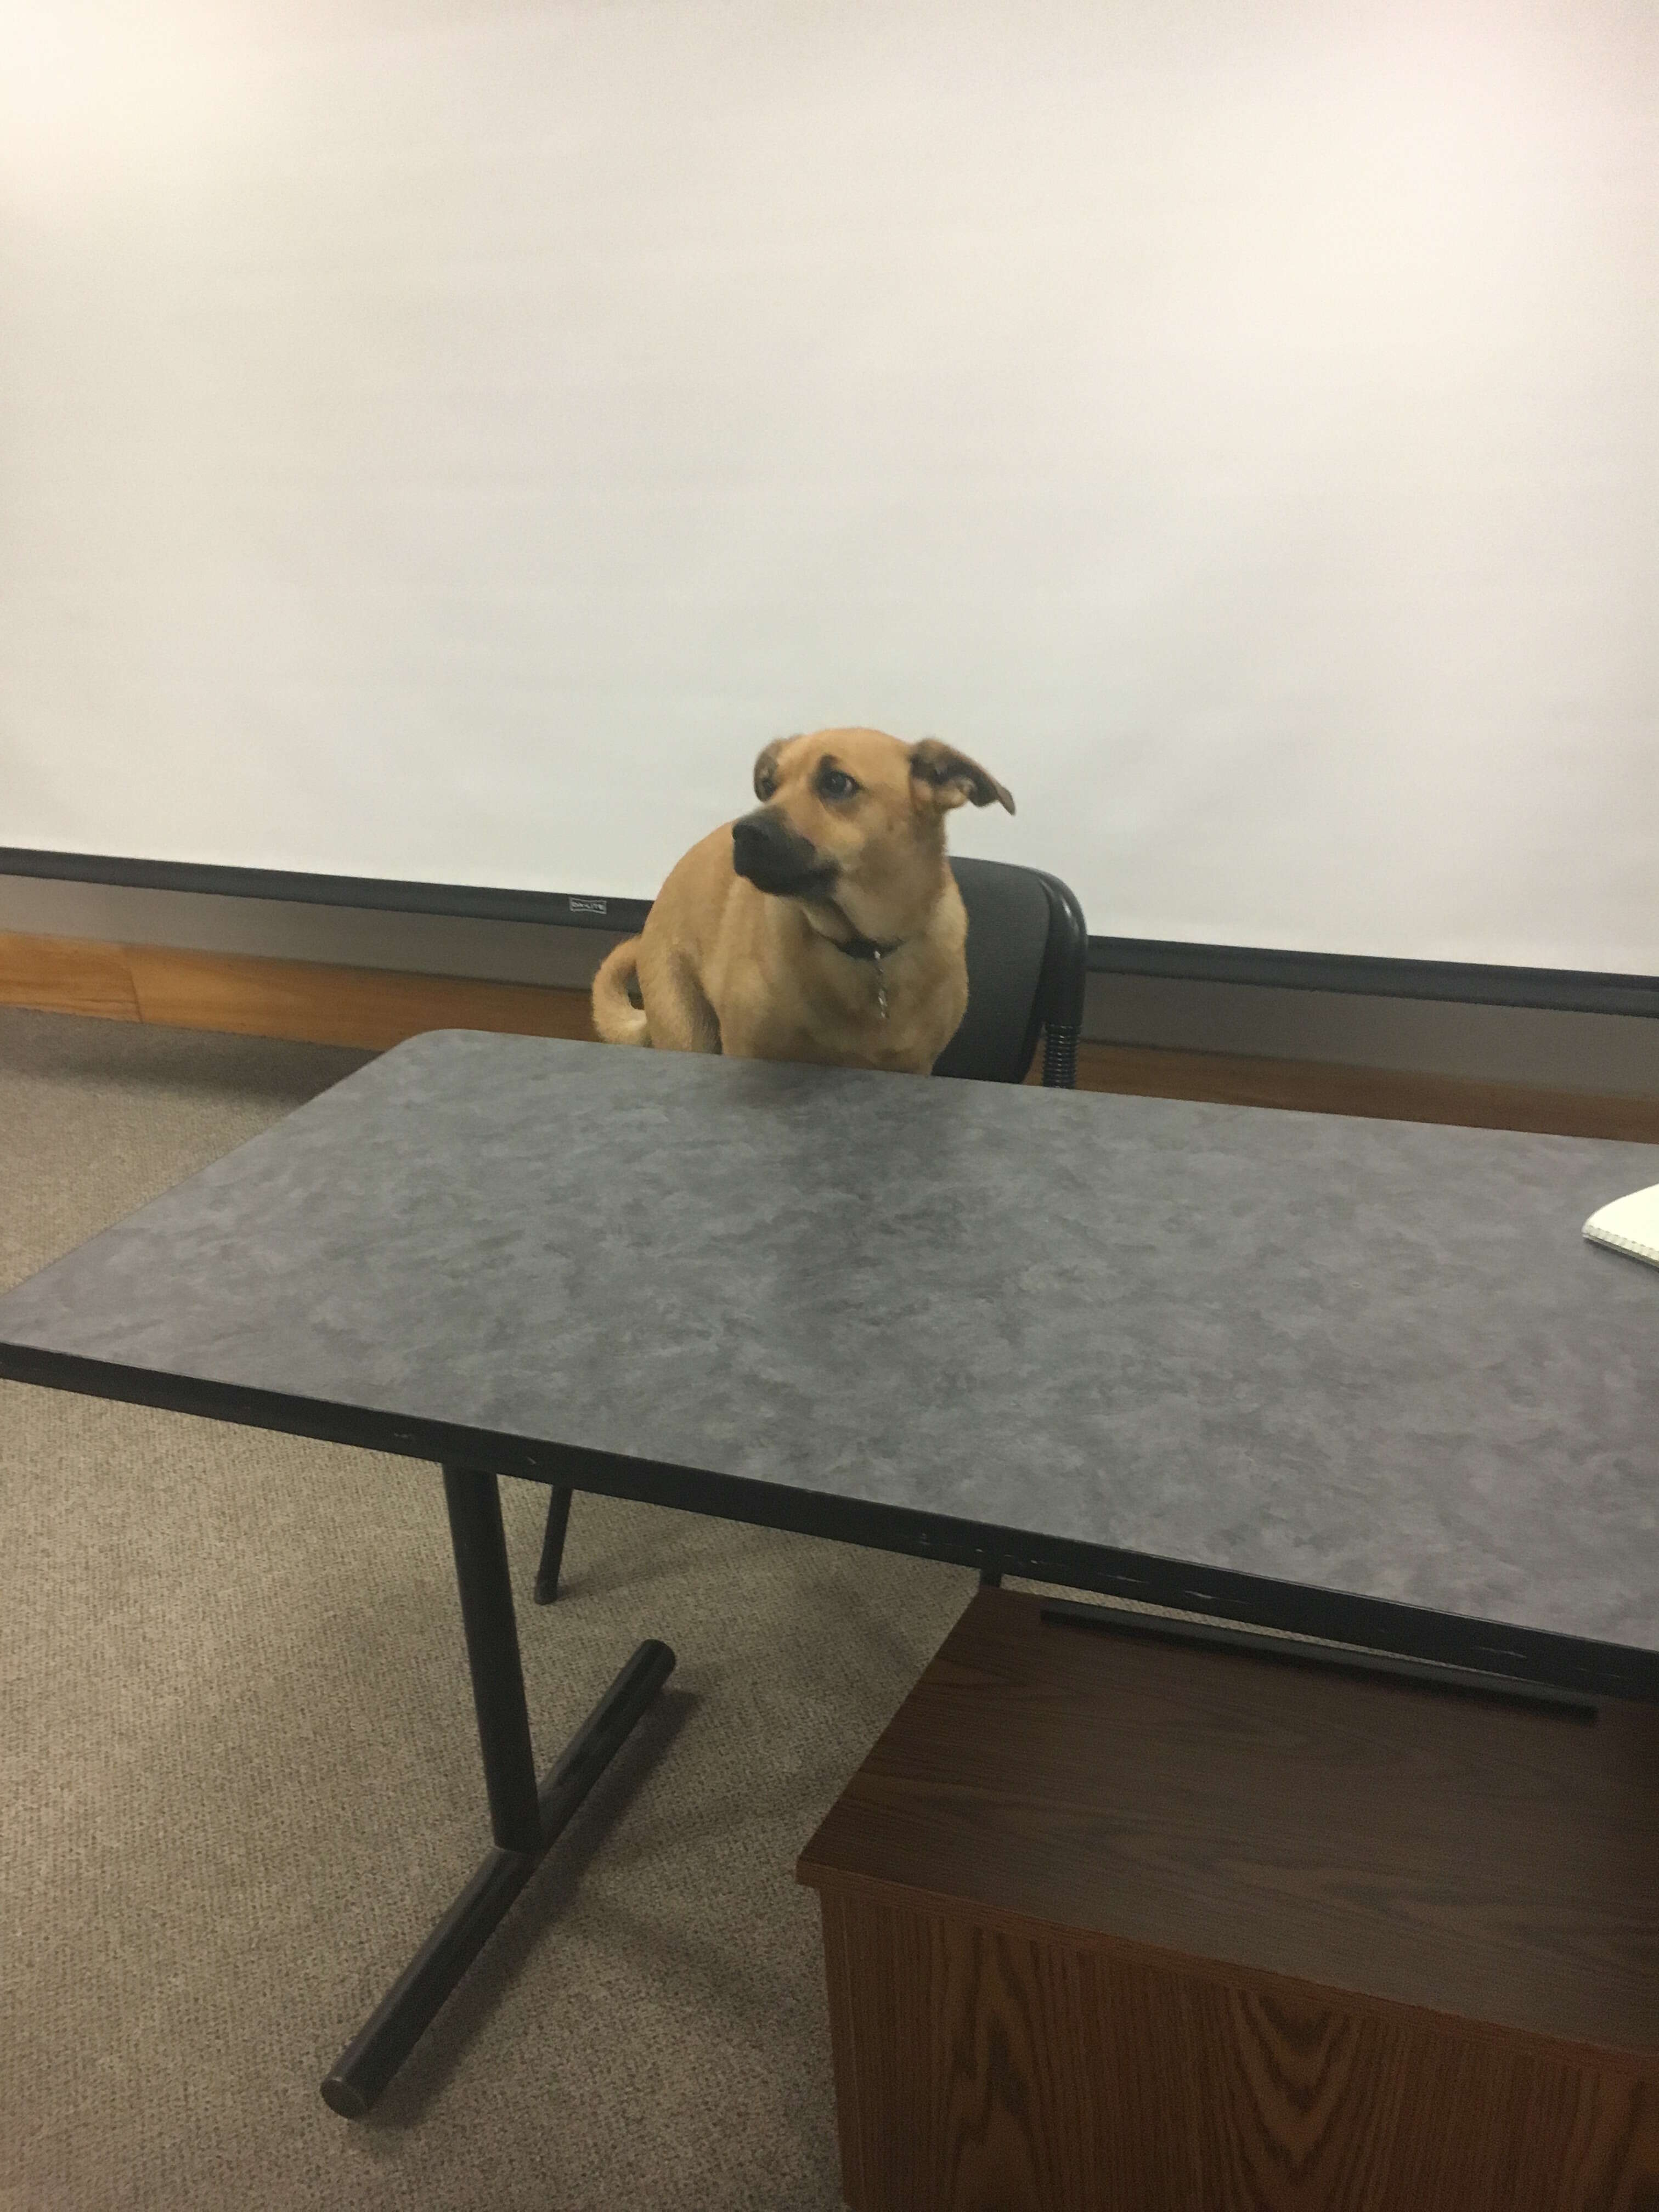 professor gives quiz about his dog